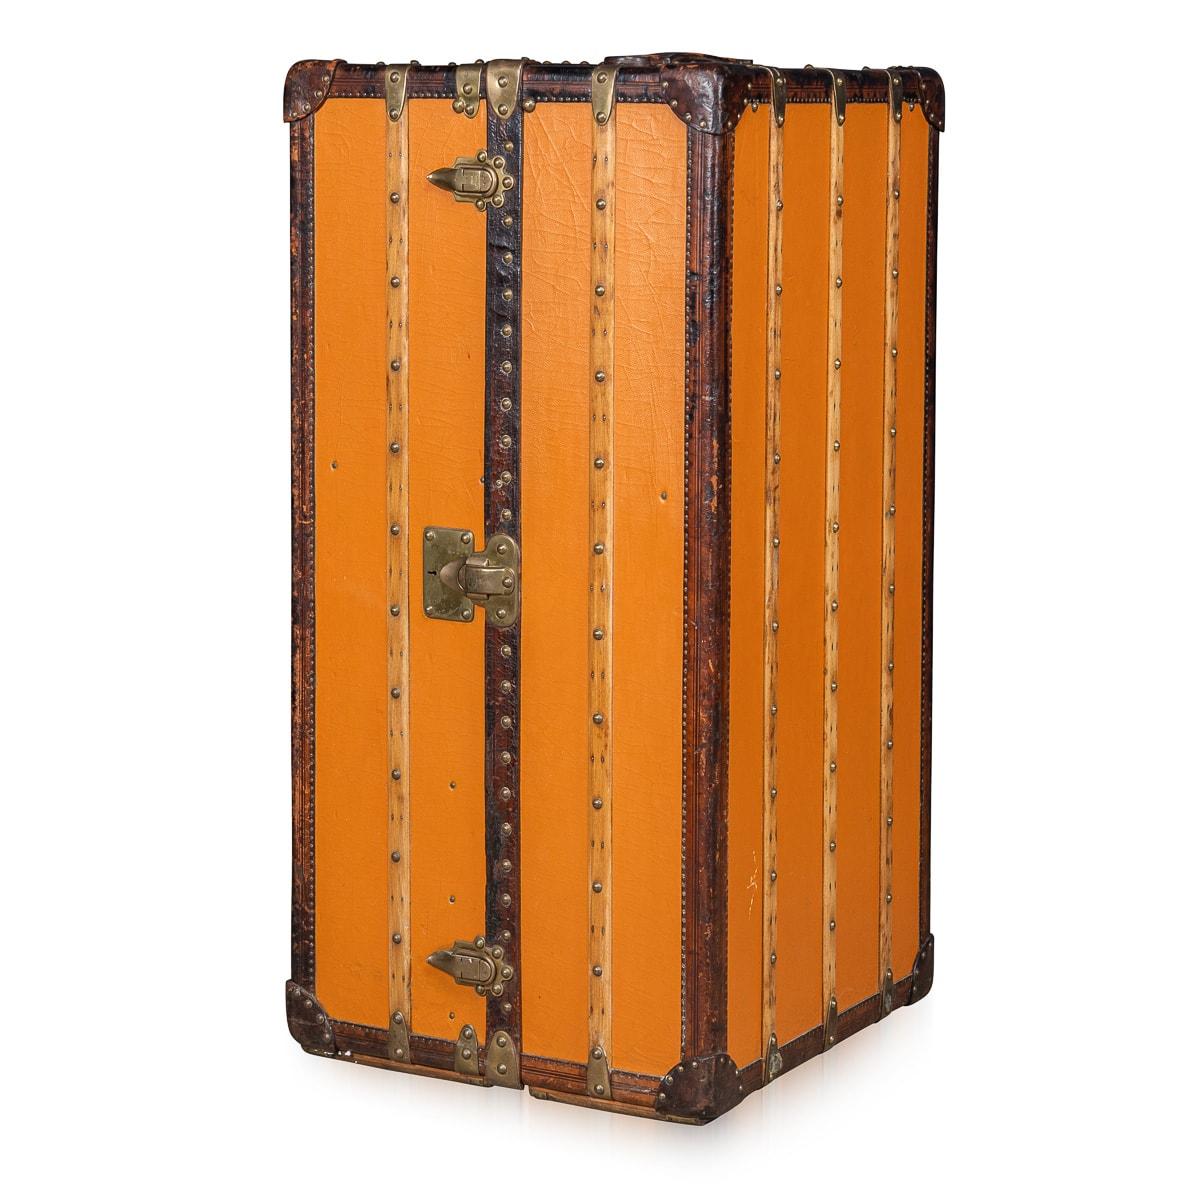 Step into the realm of vintage luxury with this exceptionally rare wardrobe trunk from Louis Vuitton, hailing from the early 20th century, around 1900-1910. Draped in the distinctive orange 